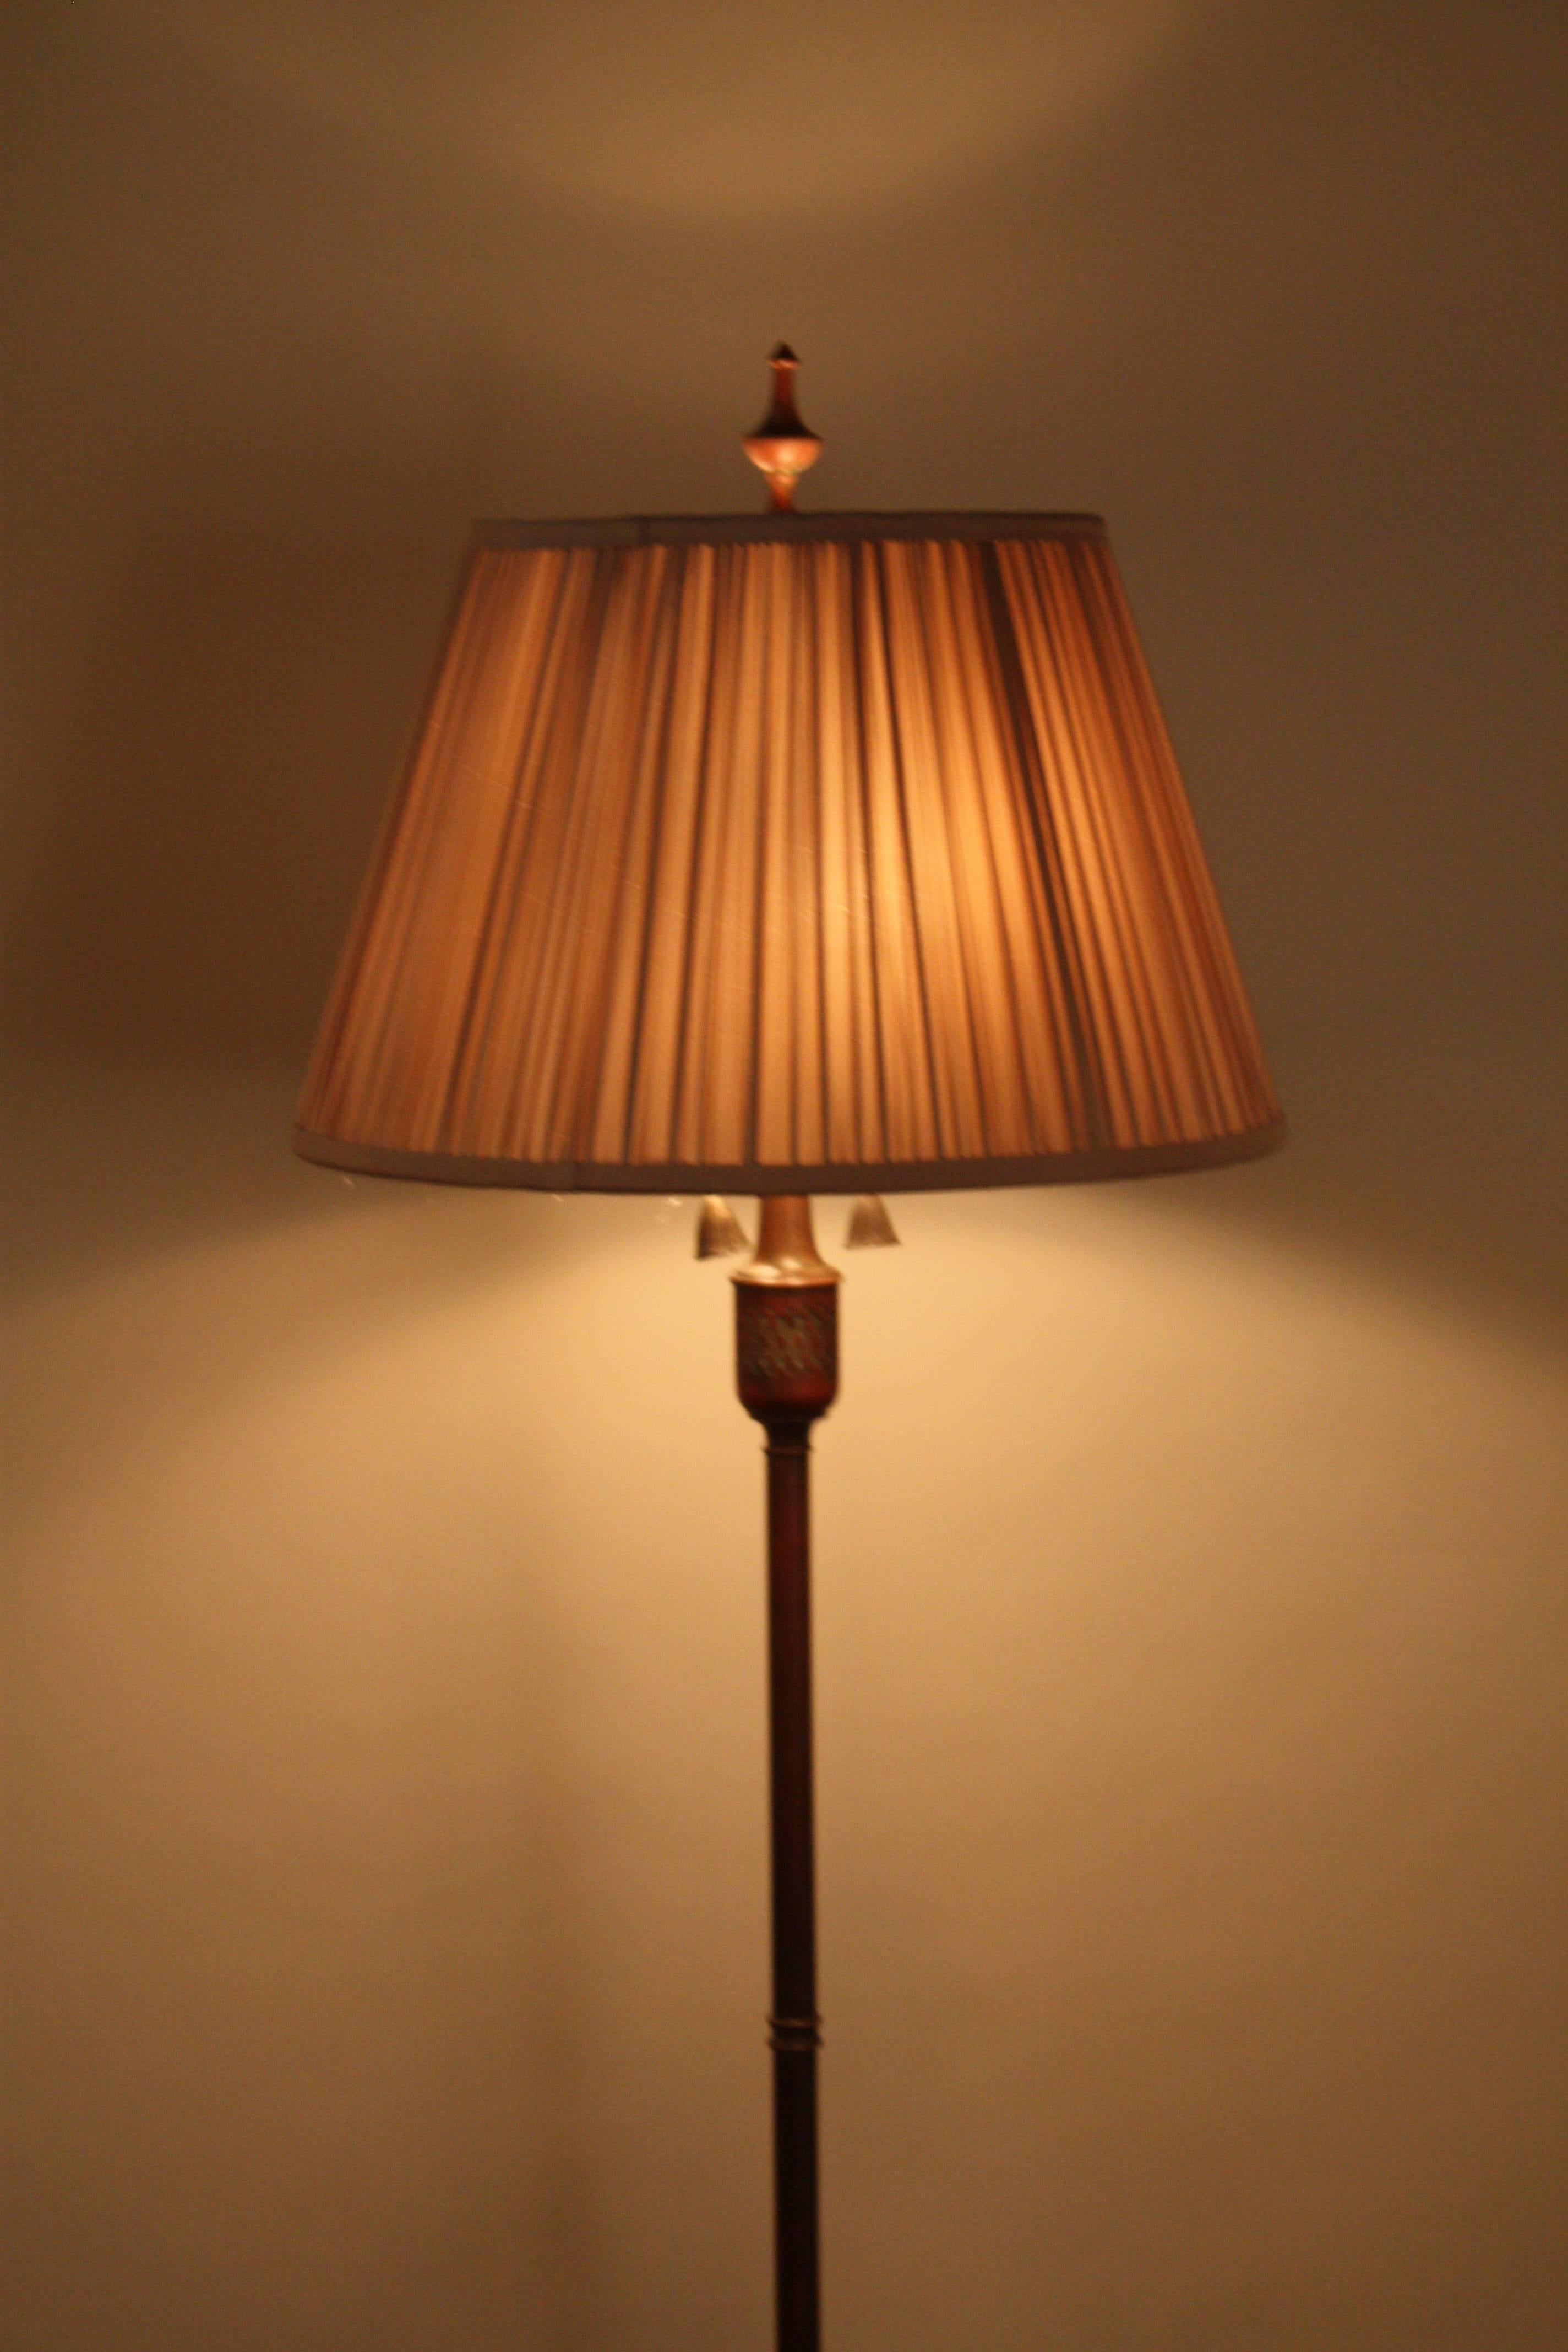 Elegant double light in brown bronze with touch of green color floor lamp.
Fitted with mushroom pleat lampshade.